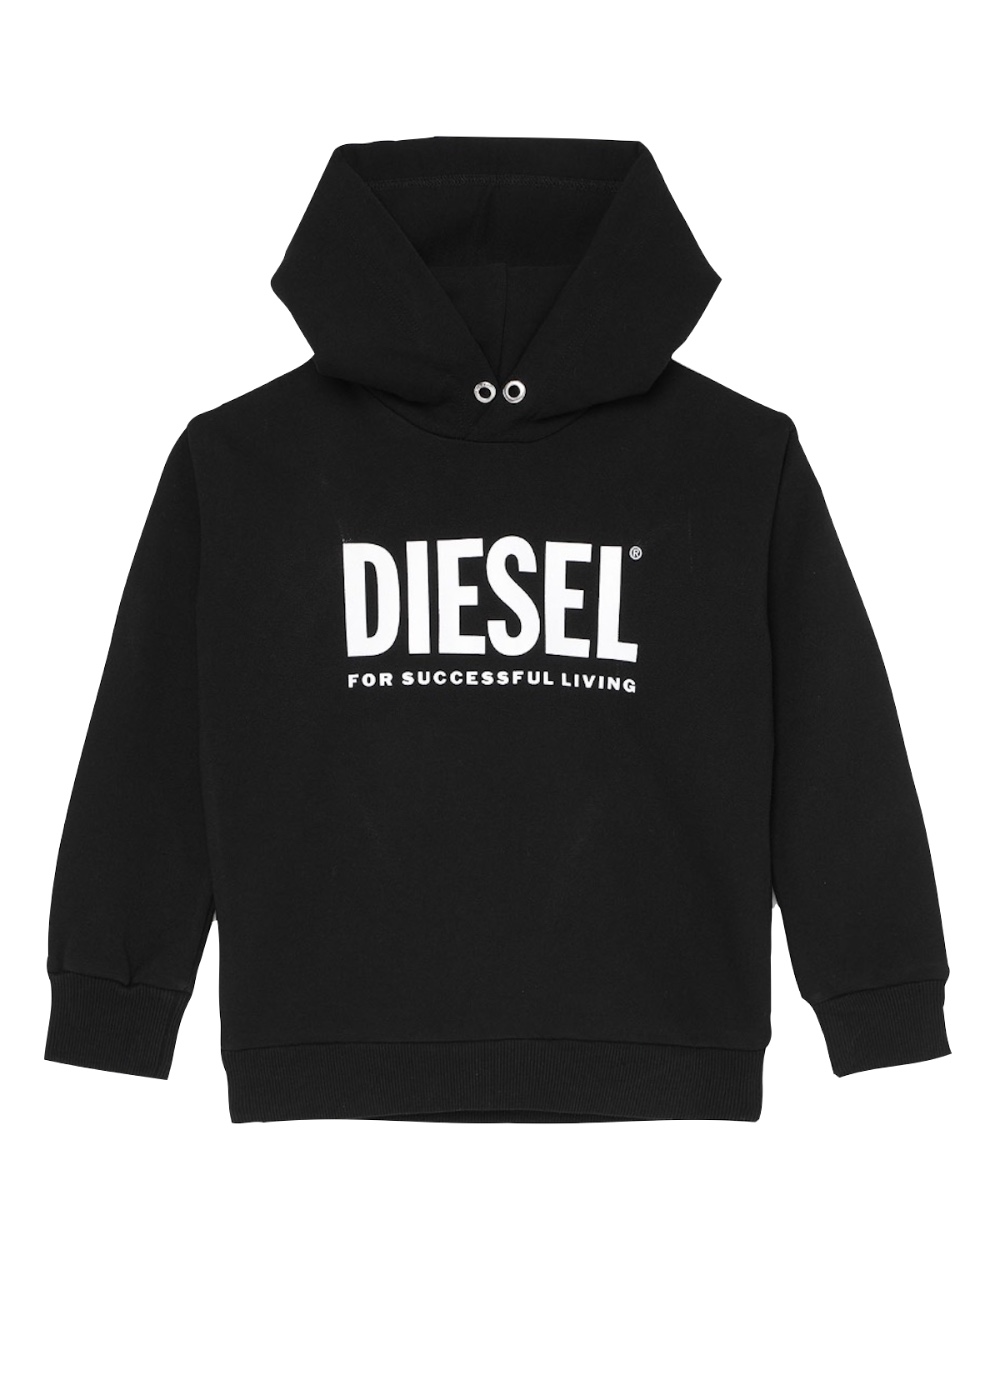 Featured image for “Diesel sdivision- logox over”